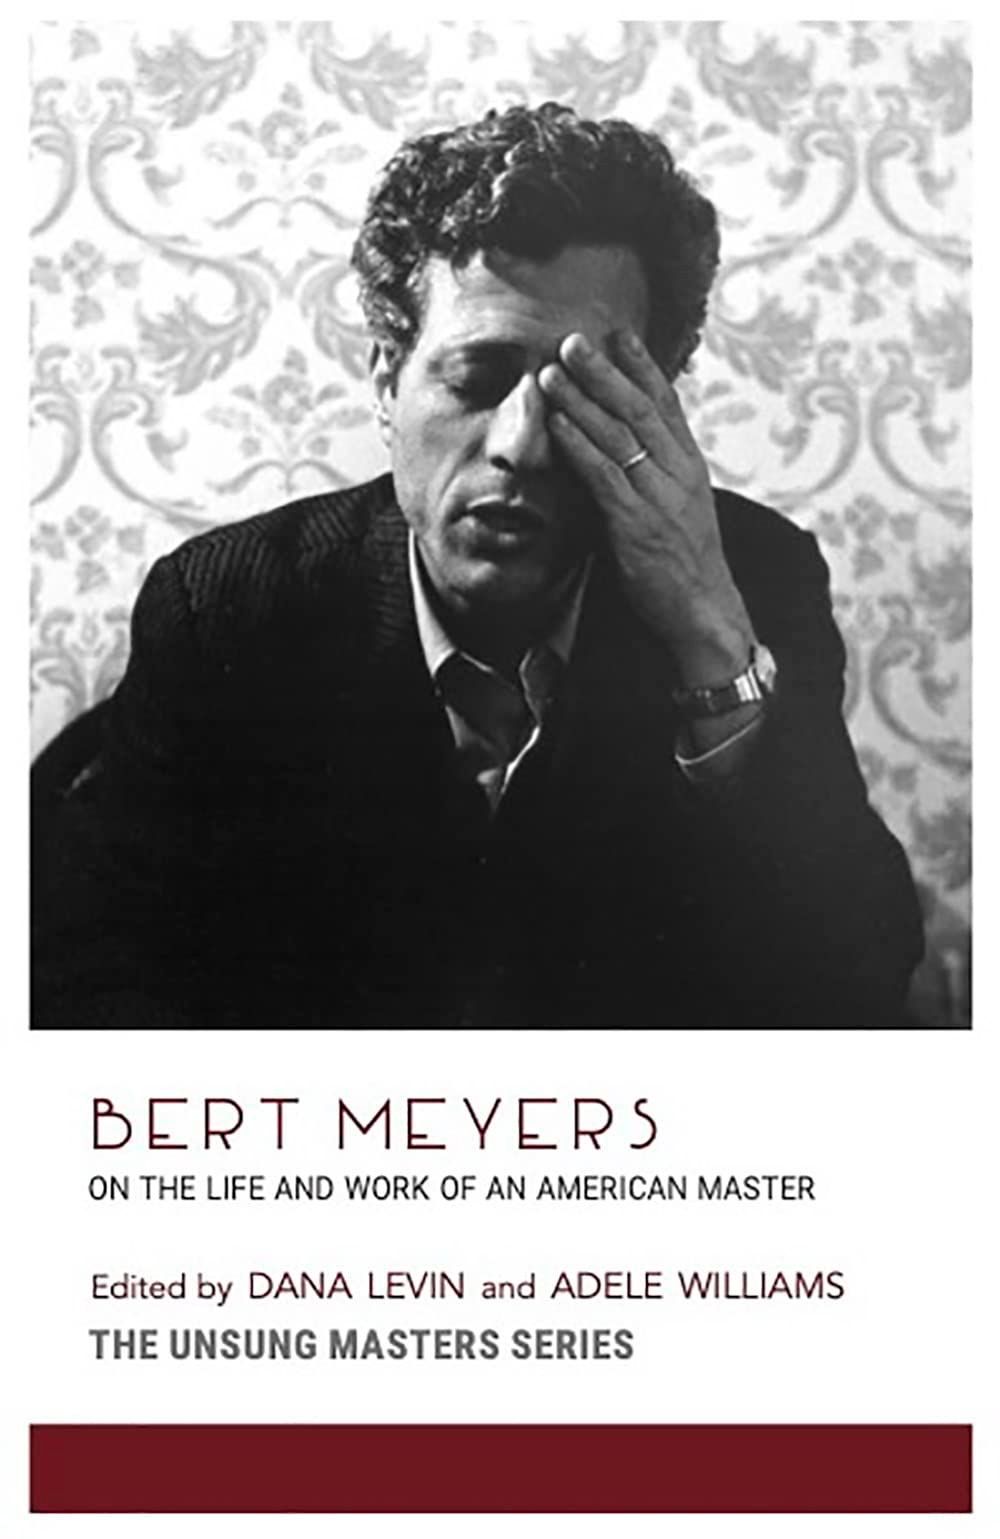 A Style So Clear It Could Wash a Face: On Pleiades Press’s “Bert Meyers”